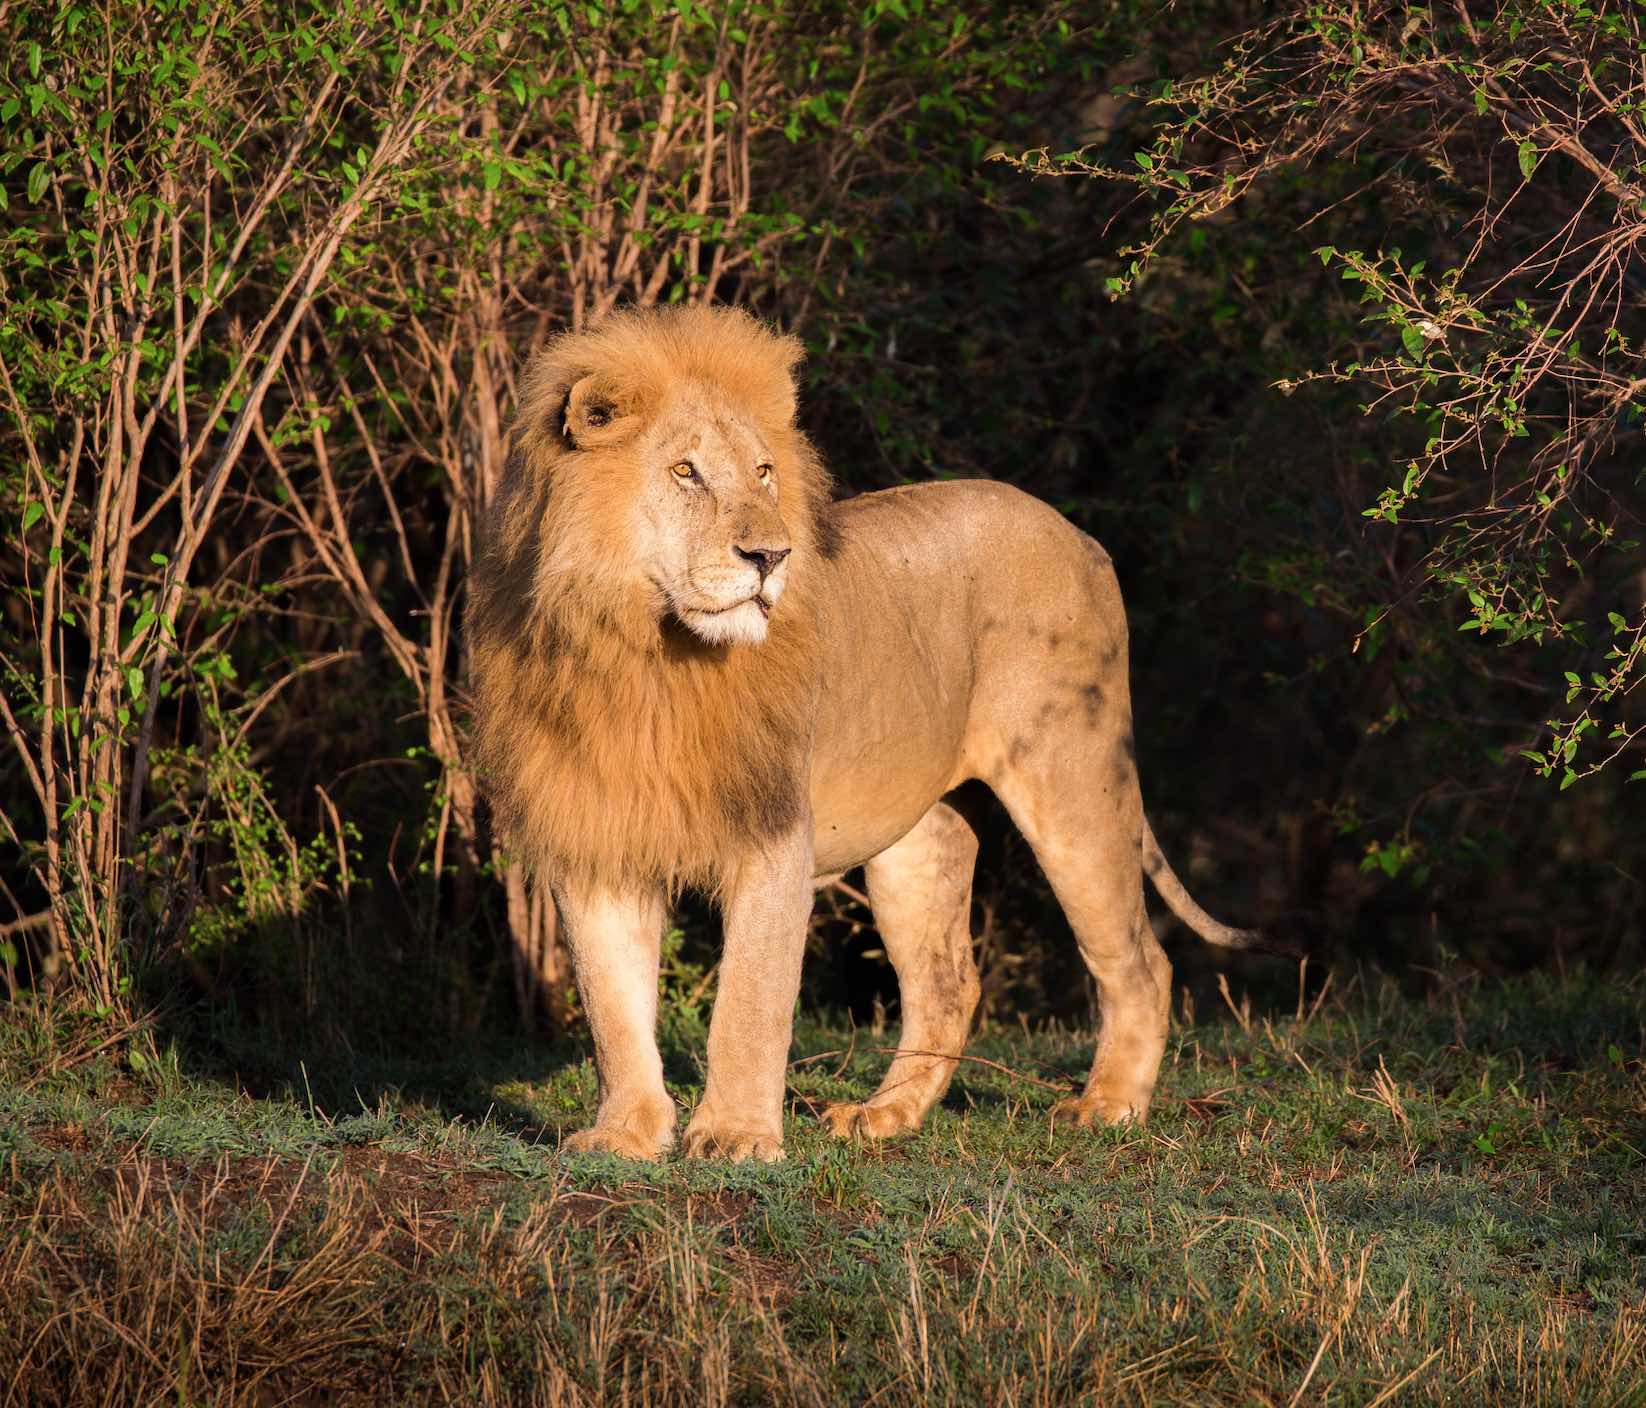 South Africa Announces End To 'Lion Farming' - WildAid